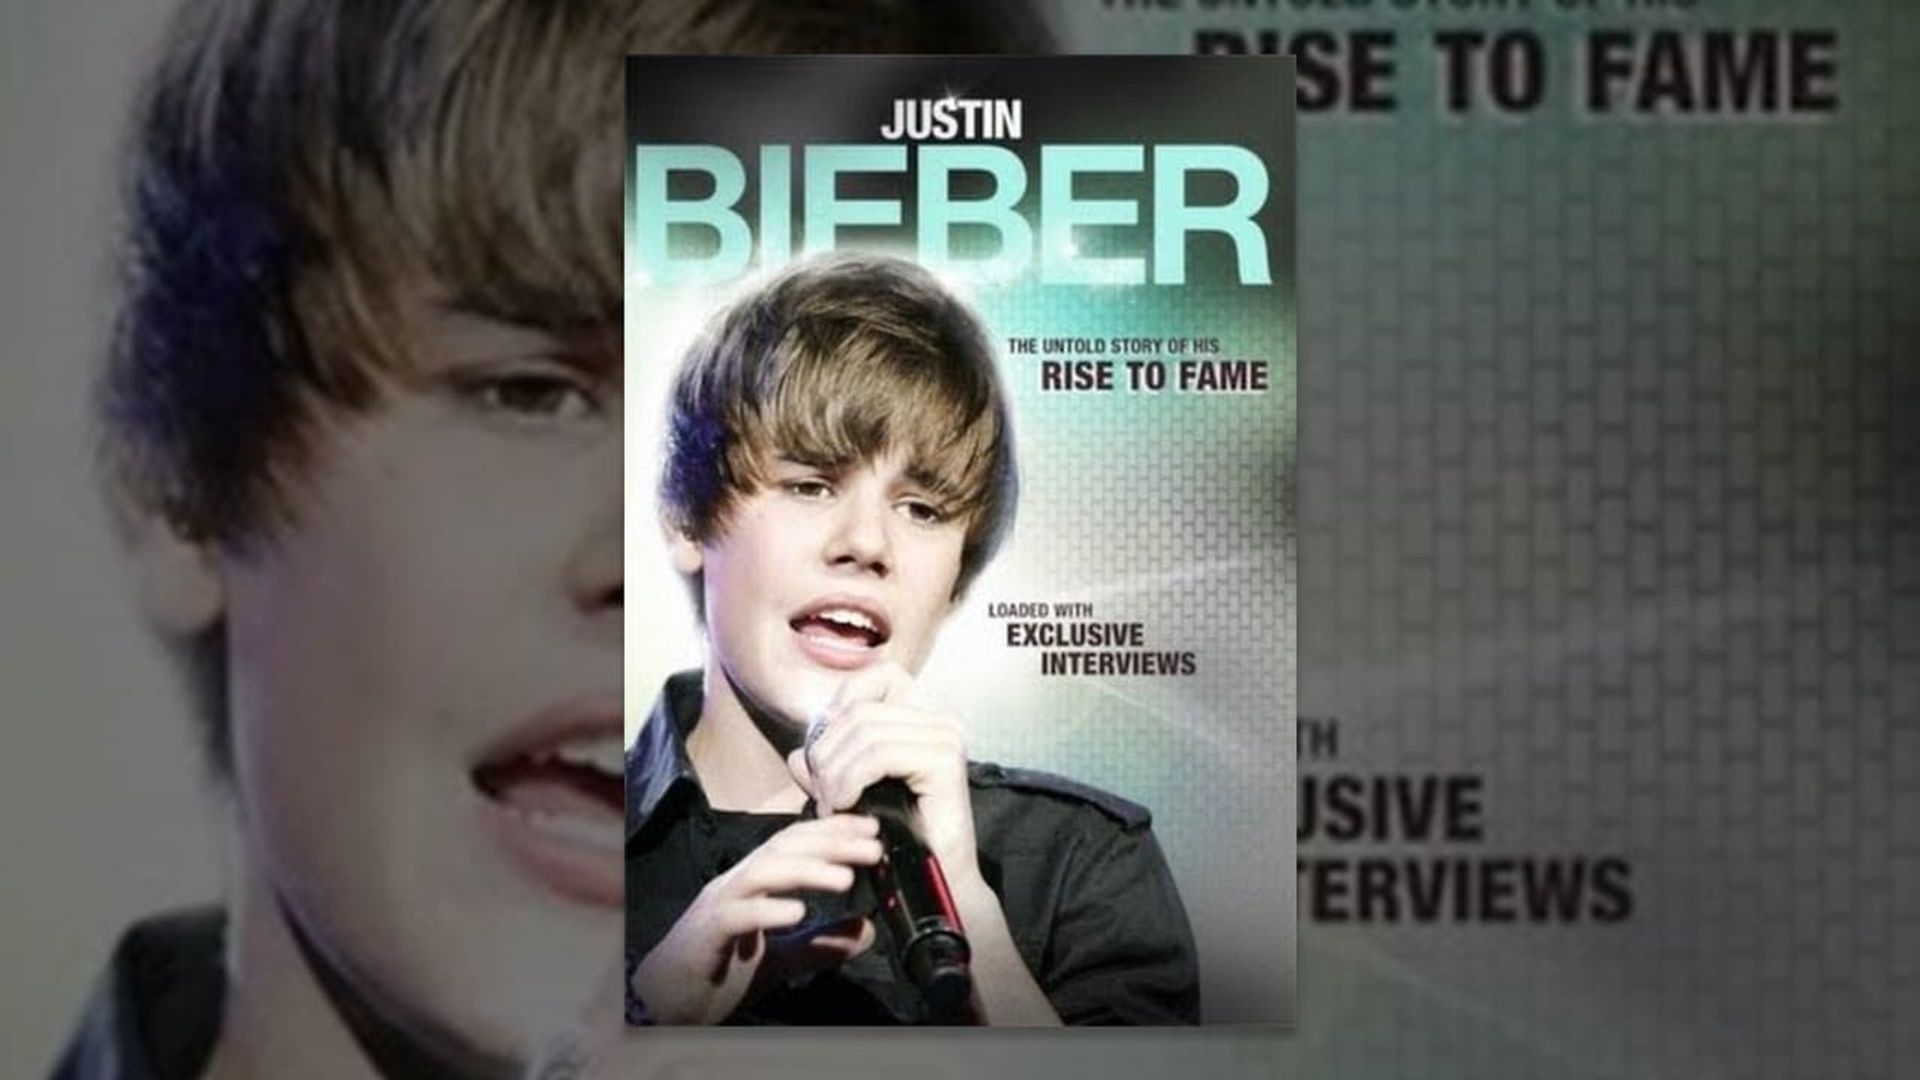 Justin Bieber: Rise to Fame background